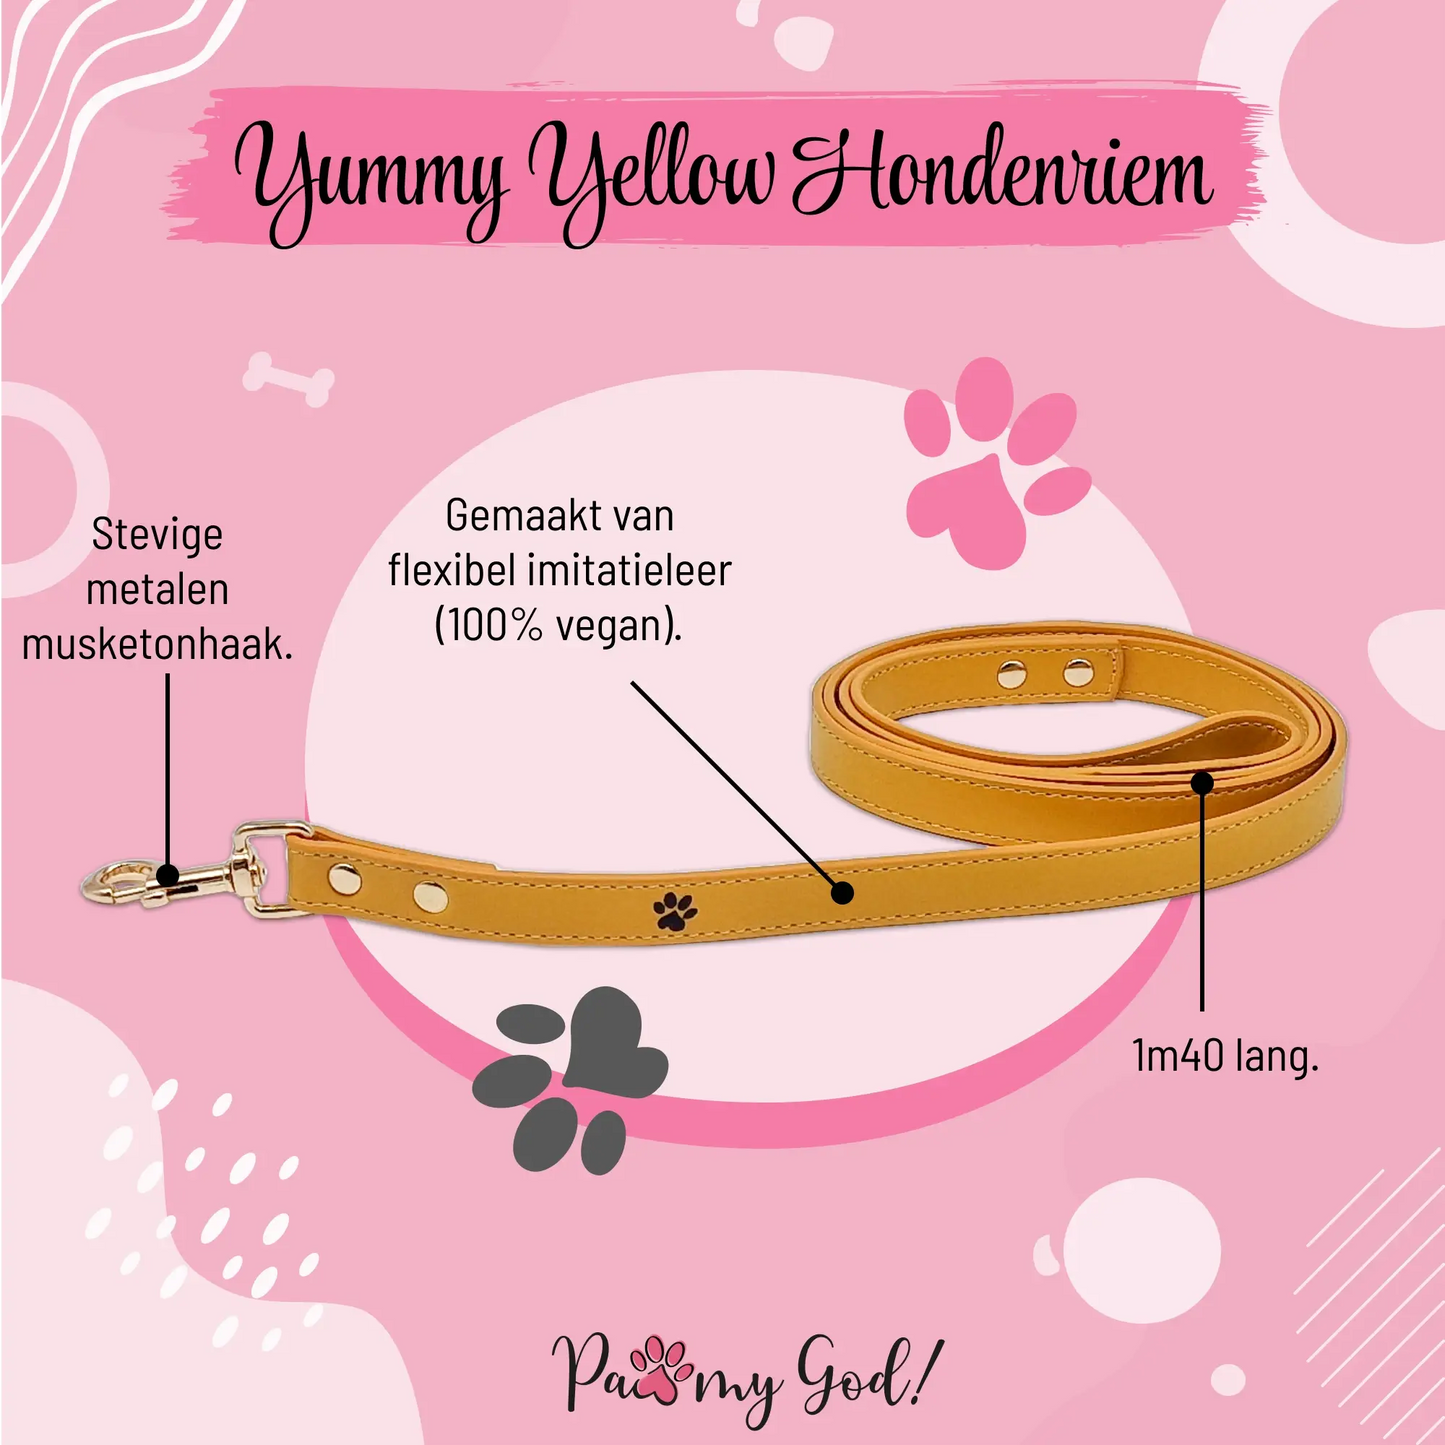 Yummy Yellow Leather Leash Features